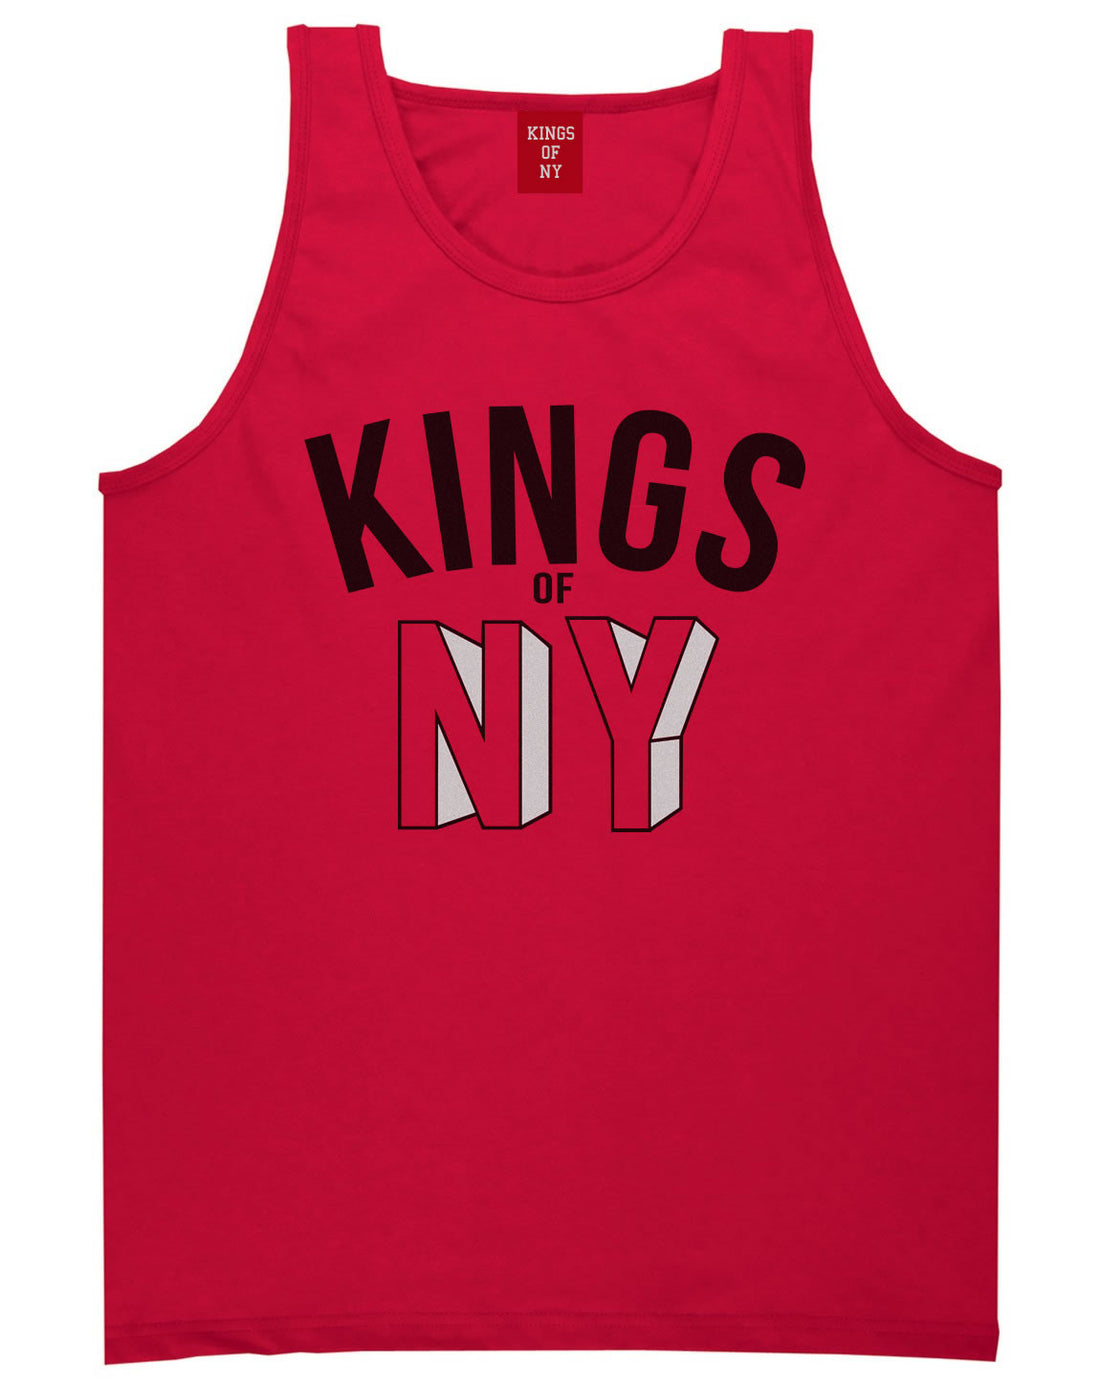 NY Red Block Letter Printed Tank Top in Red by Kings Of NY